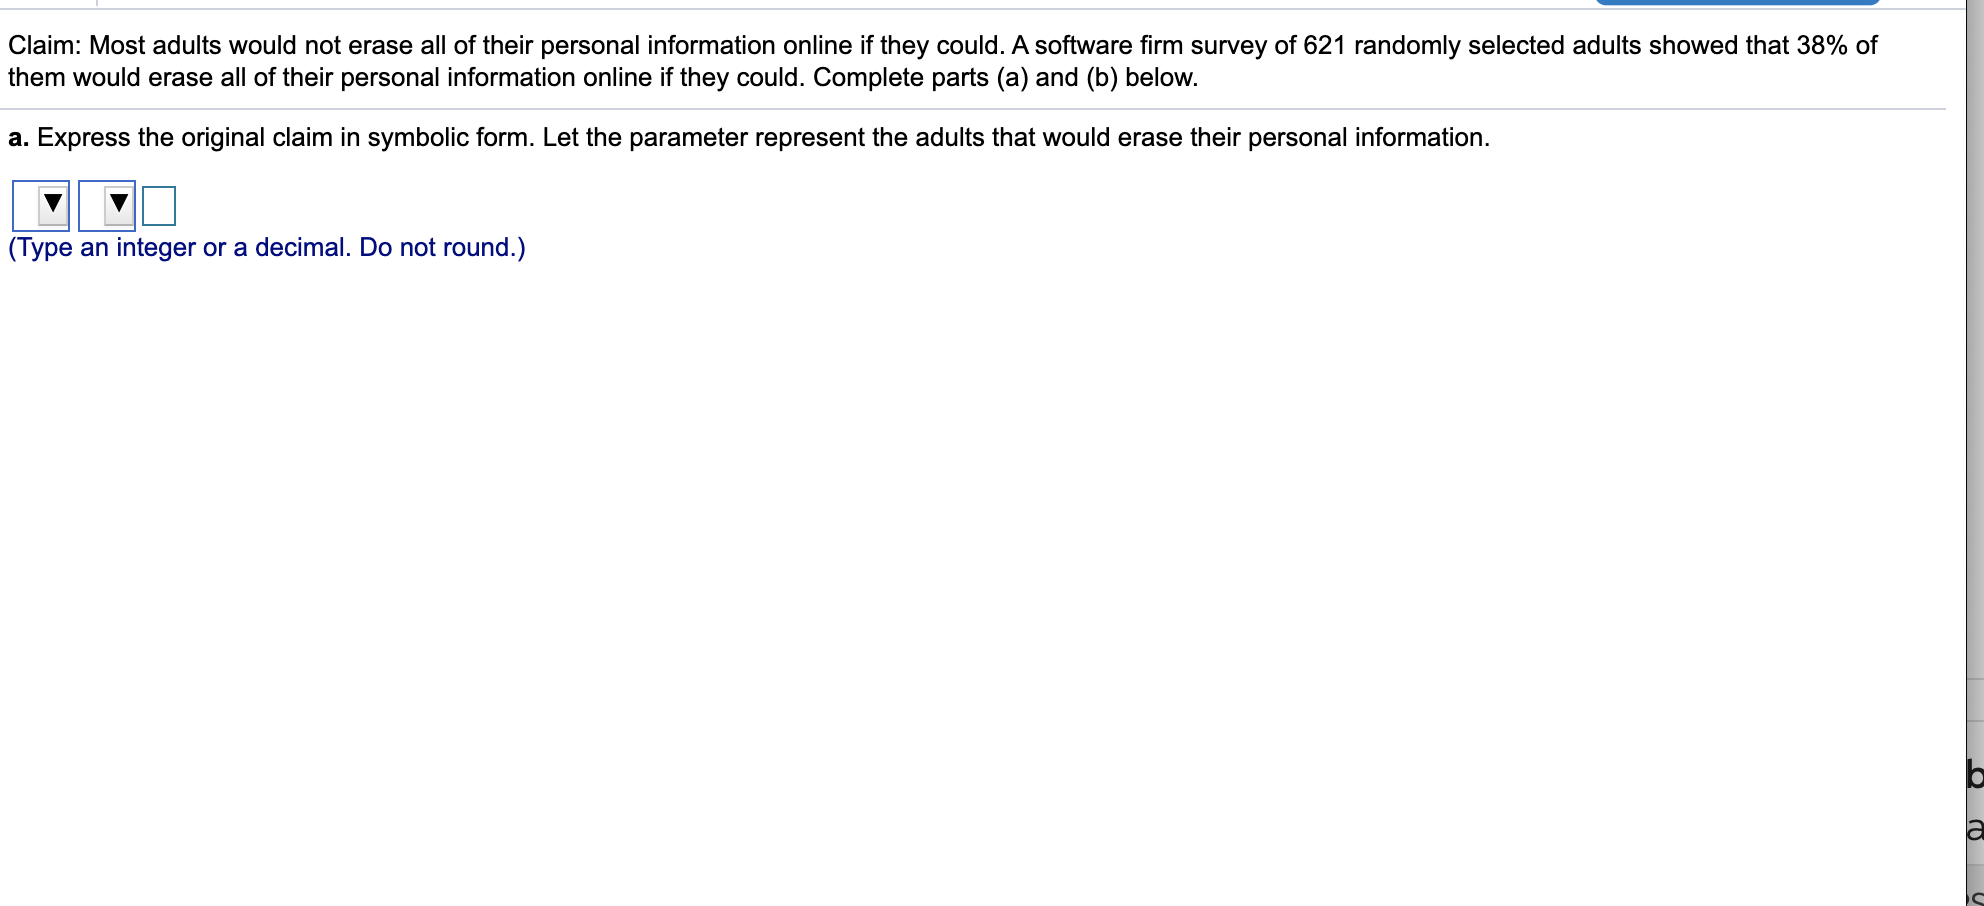 Claim: Most adults would not erase all of their personal information online if they could. A software firm survey of 621 randomly selected adults showed that 38% of
them would erase all of their personal information online if they could. Complete parts (a) and (b) below.
a. Express the original claim in symbolic form. Let the parameter represent the adults that would erase their personal information.
